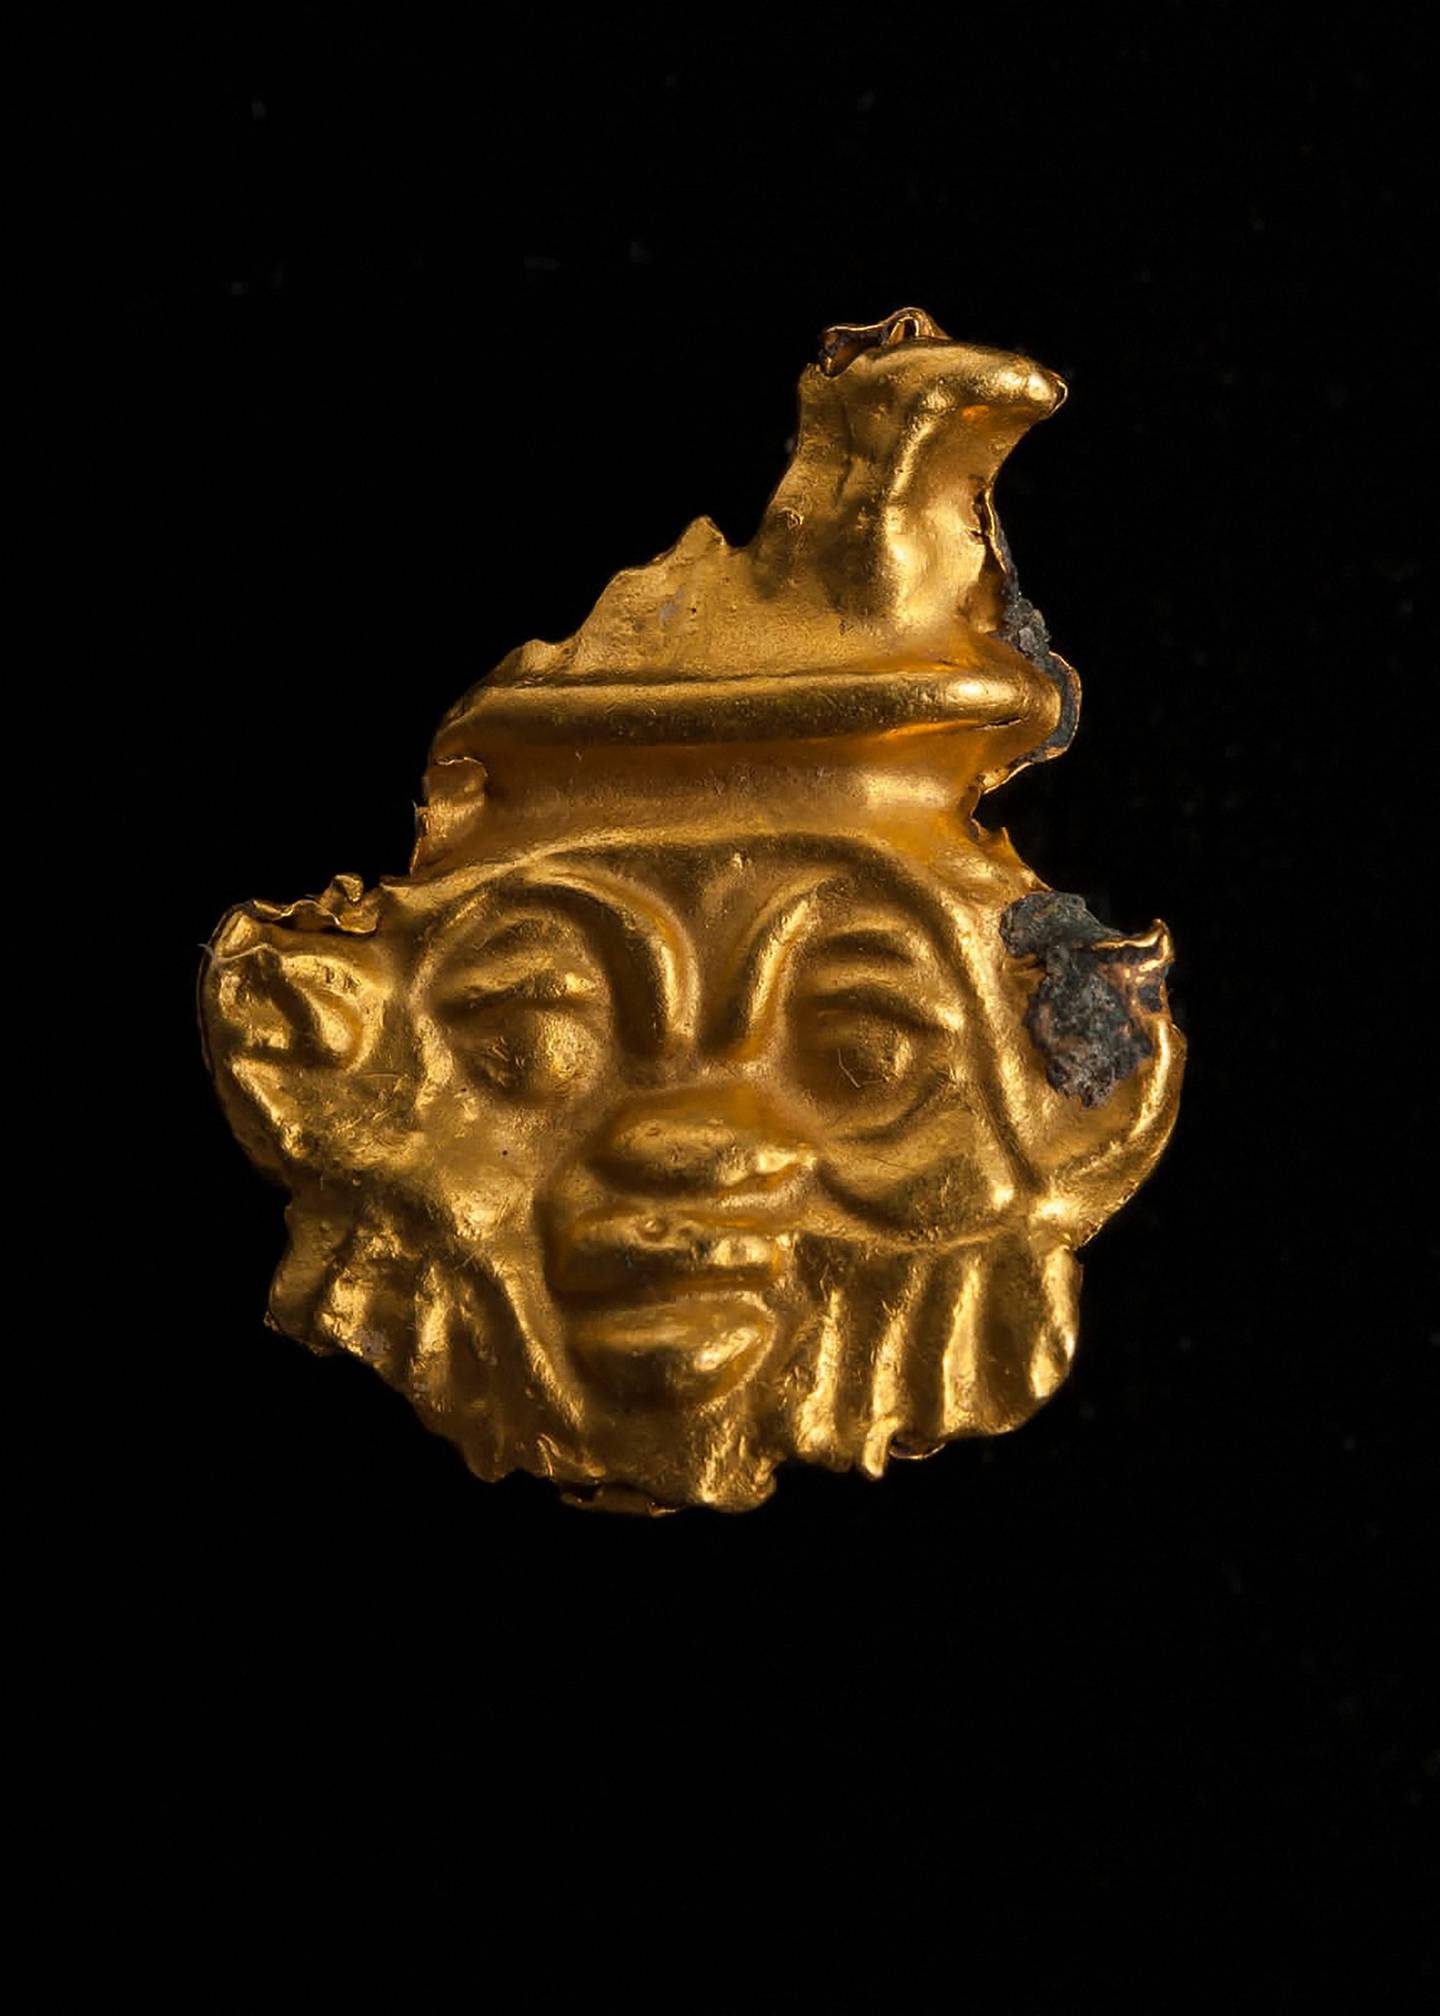 A golden fragment uncovered in the sunken city of Thonis-Heracleion in Abu Qir Bay, on Egypt's northern Mediterranean coast. 